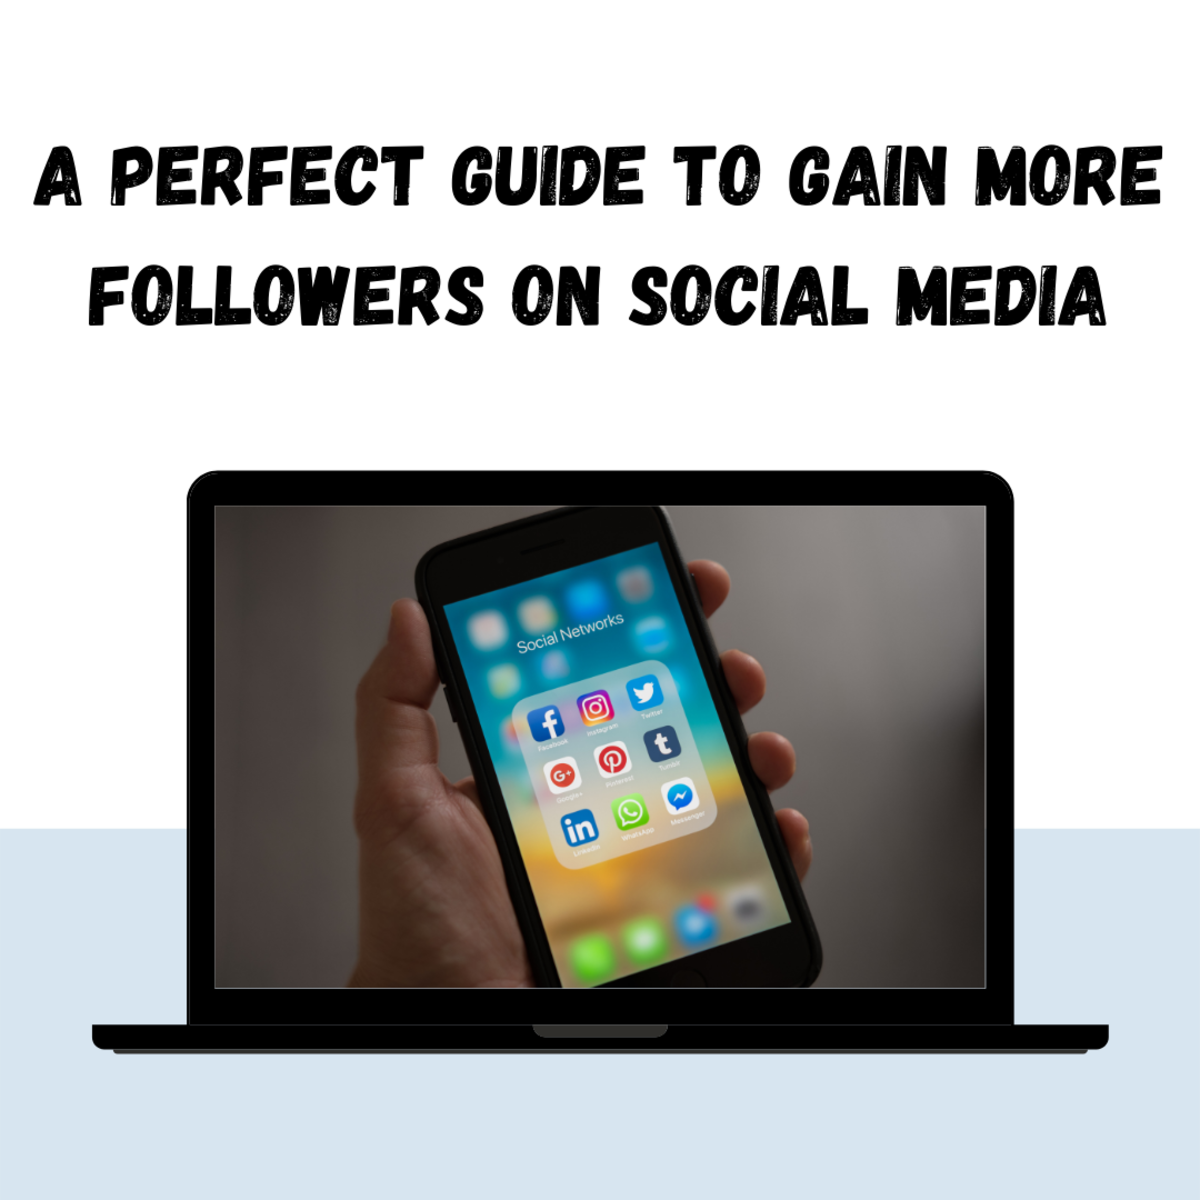 A Perfect Guide To Gain More Followers On Social Media